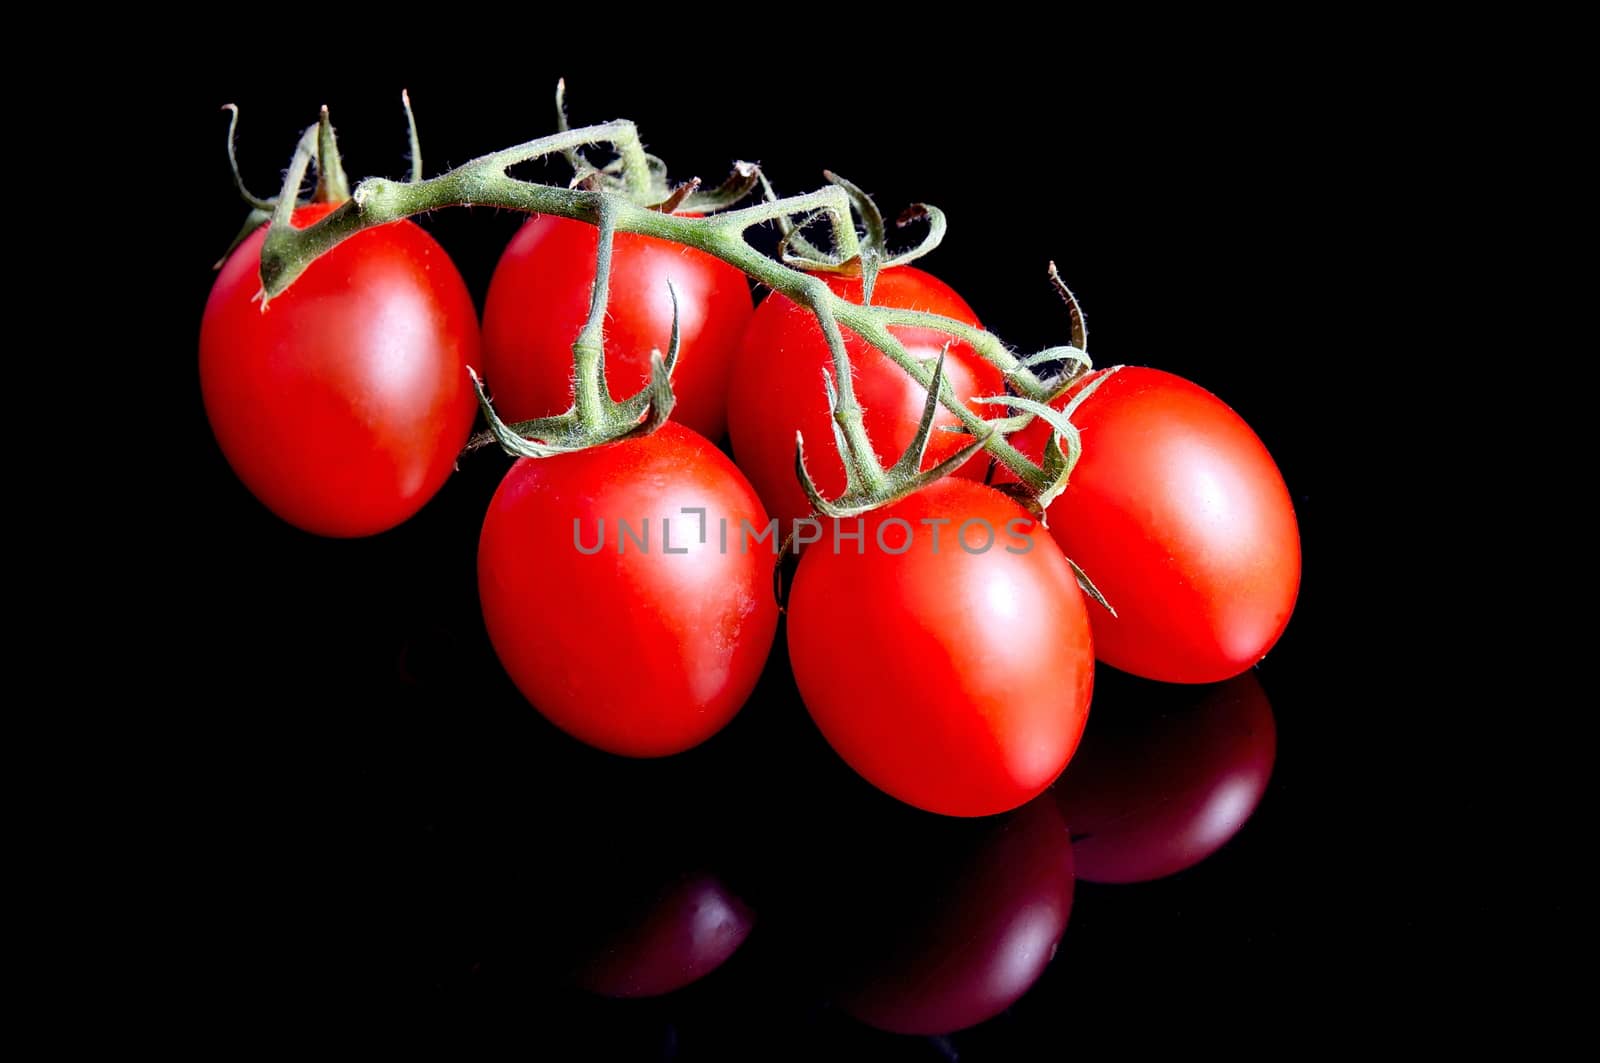 Tomatoes on black by anderm